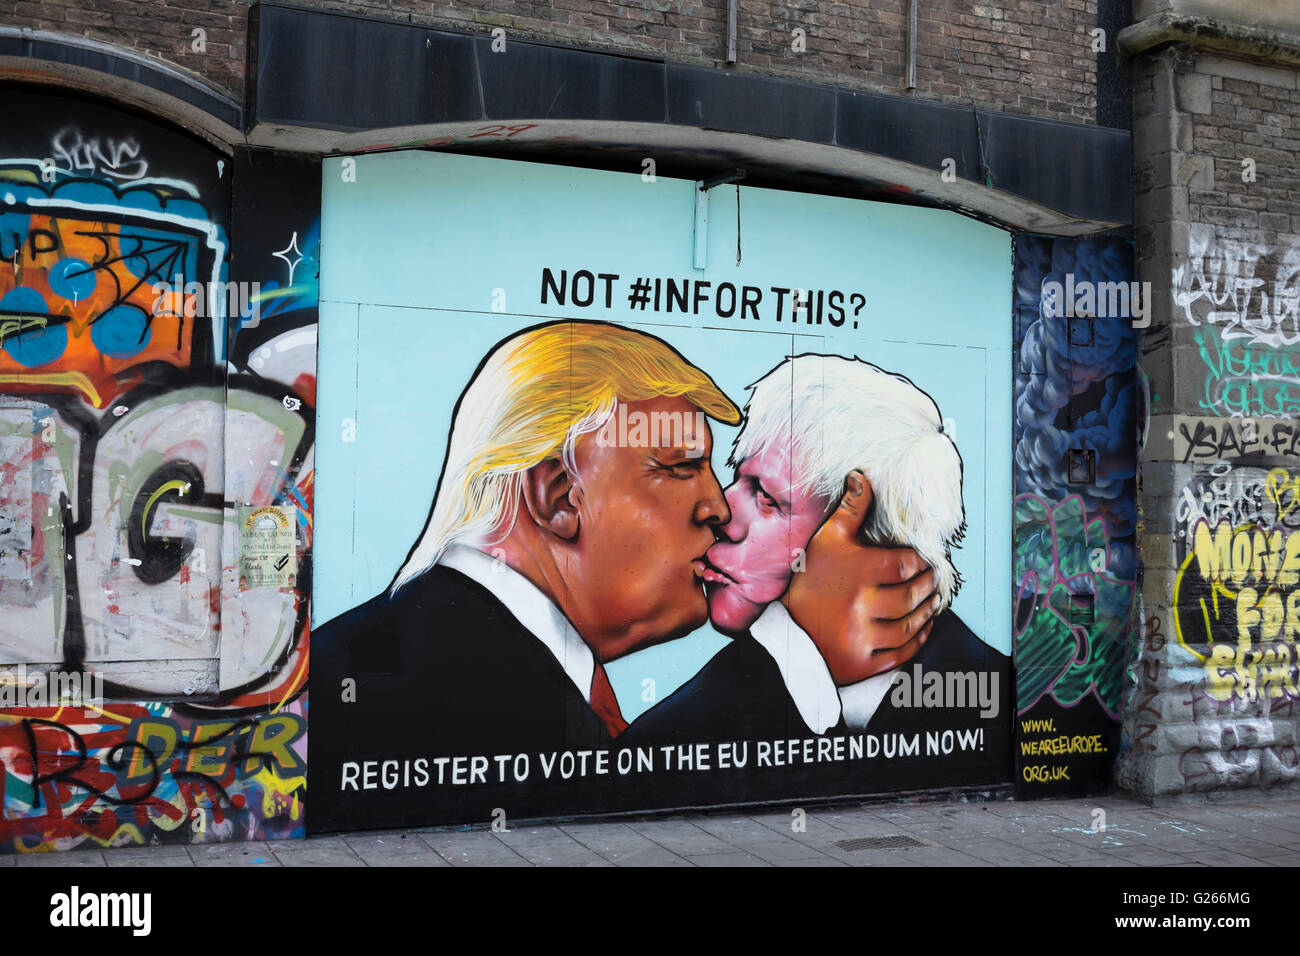 Stokes Croft, Bristol, UK. 24th May, 2016. Stokes Croft is an area of Bristol known for its grafitti. The latest addition is this image of US presidential hopefull Donald Trump and UK 'Brexit' campaignerr Boris Johnson in an embrace. A message explains the importance of registering to vote in the forthcoming UK EU referendum. Credit:  Mr Standfast/Alamy Live News Stock Photo